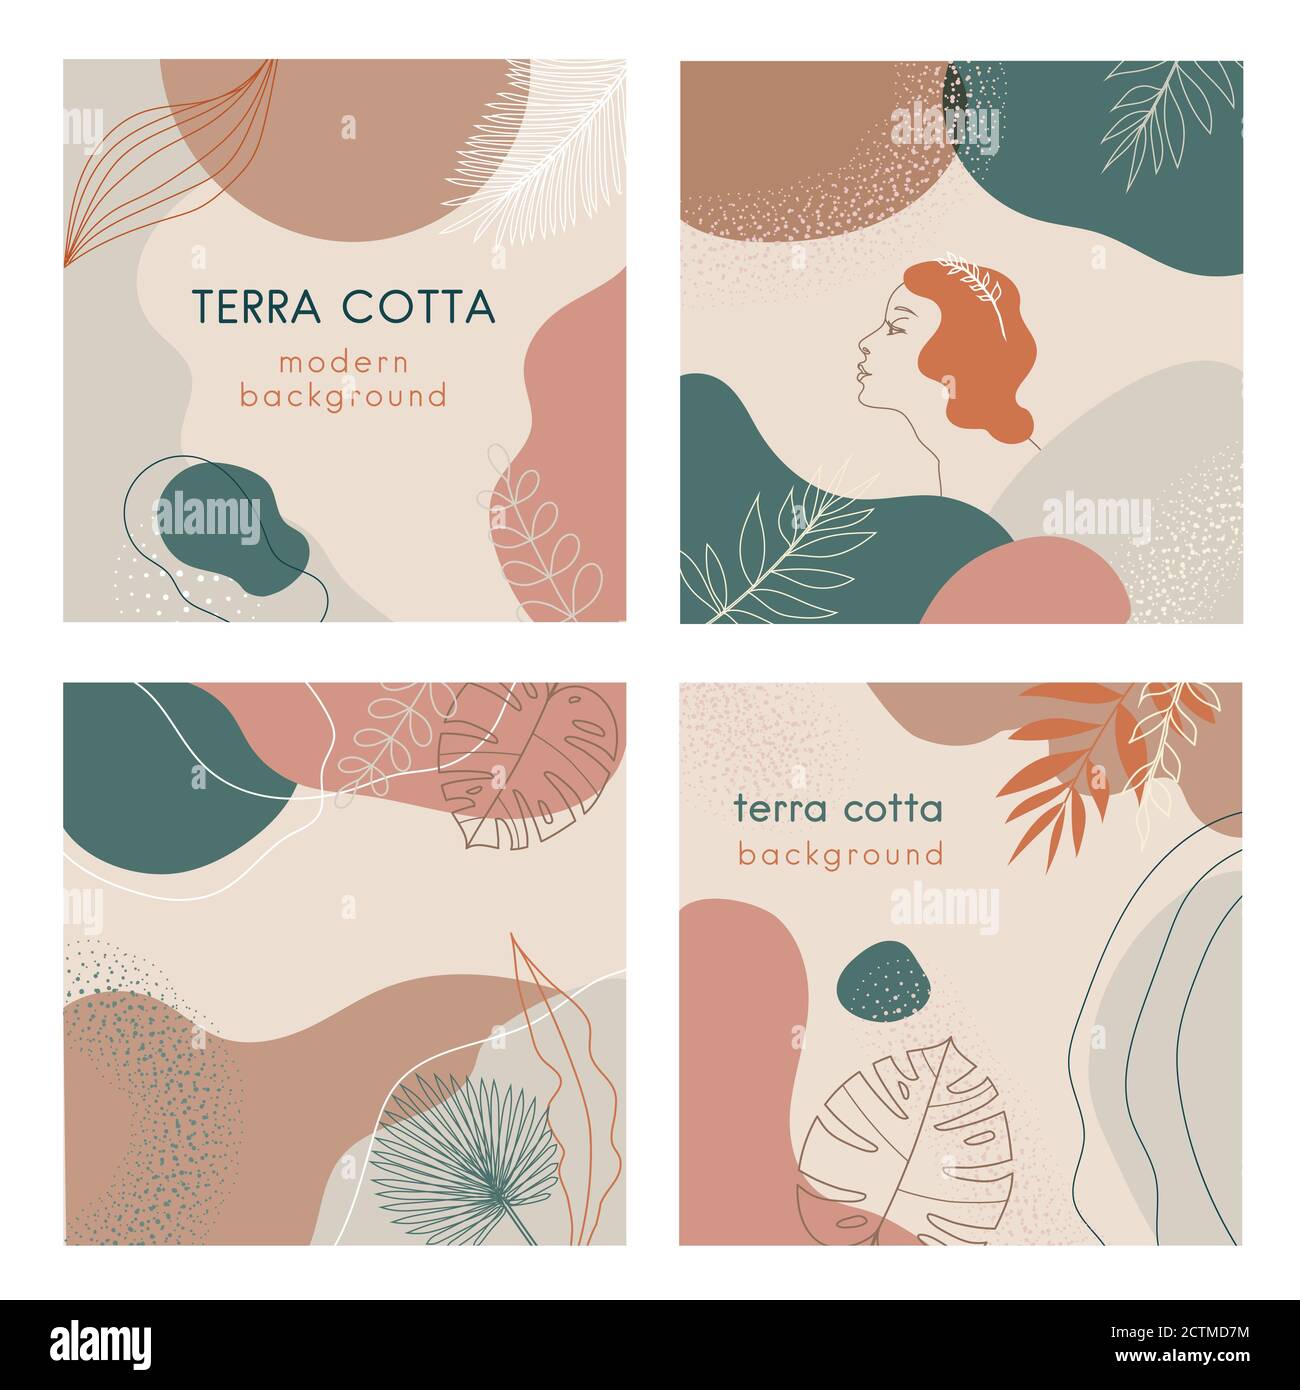 Terra cotta color Social media banners set of abstract modern backgrounds Stock Vector